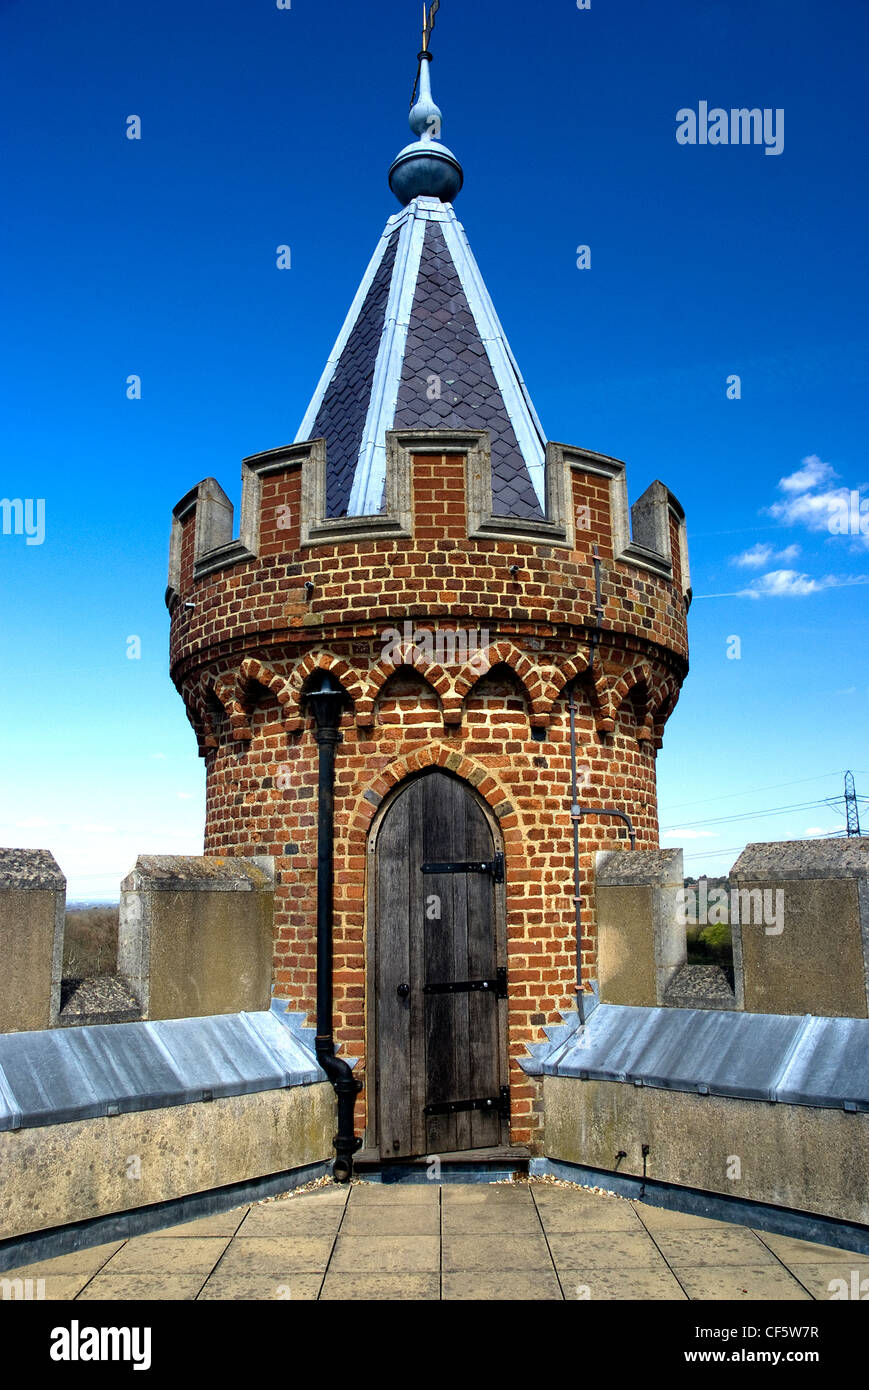 The turret at the top of the Gothic Tower in Painshill Park, often referred to by Hon. Charles Hamilton (MP), the designer and c Stock Photo